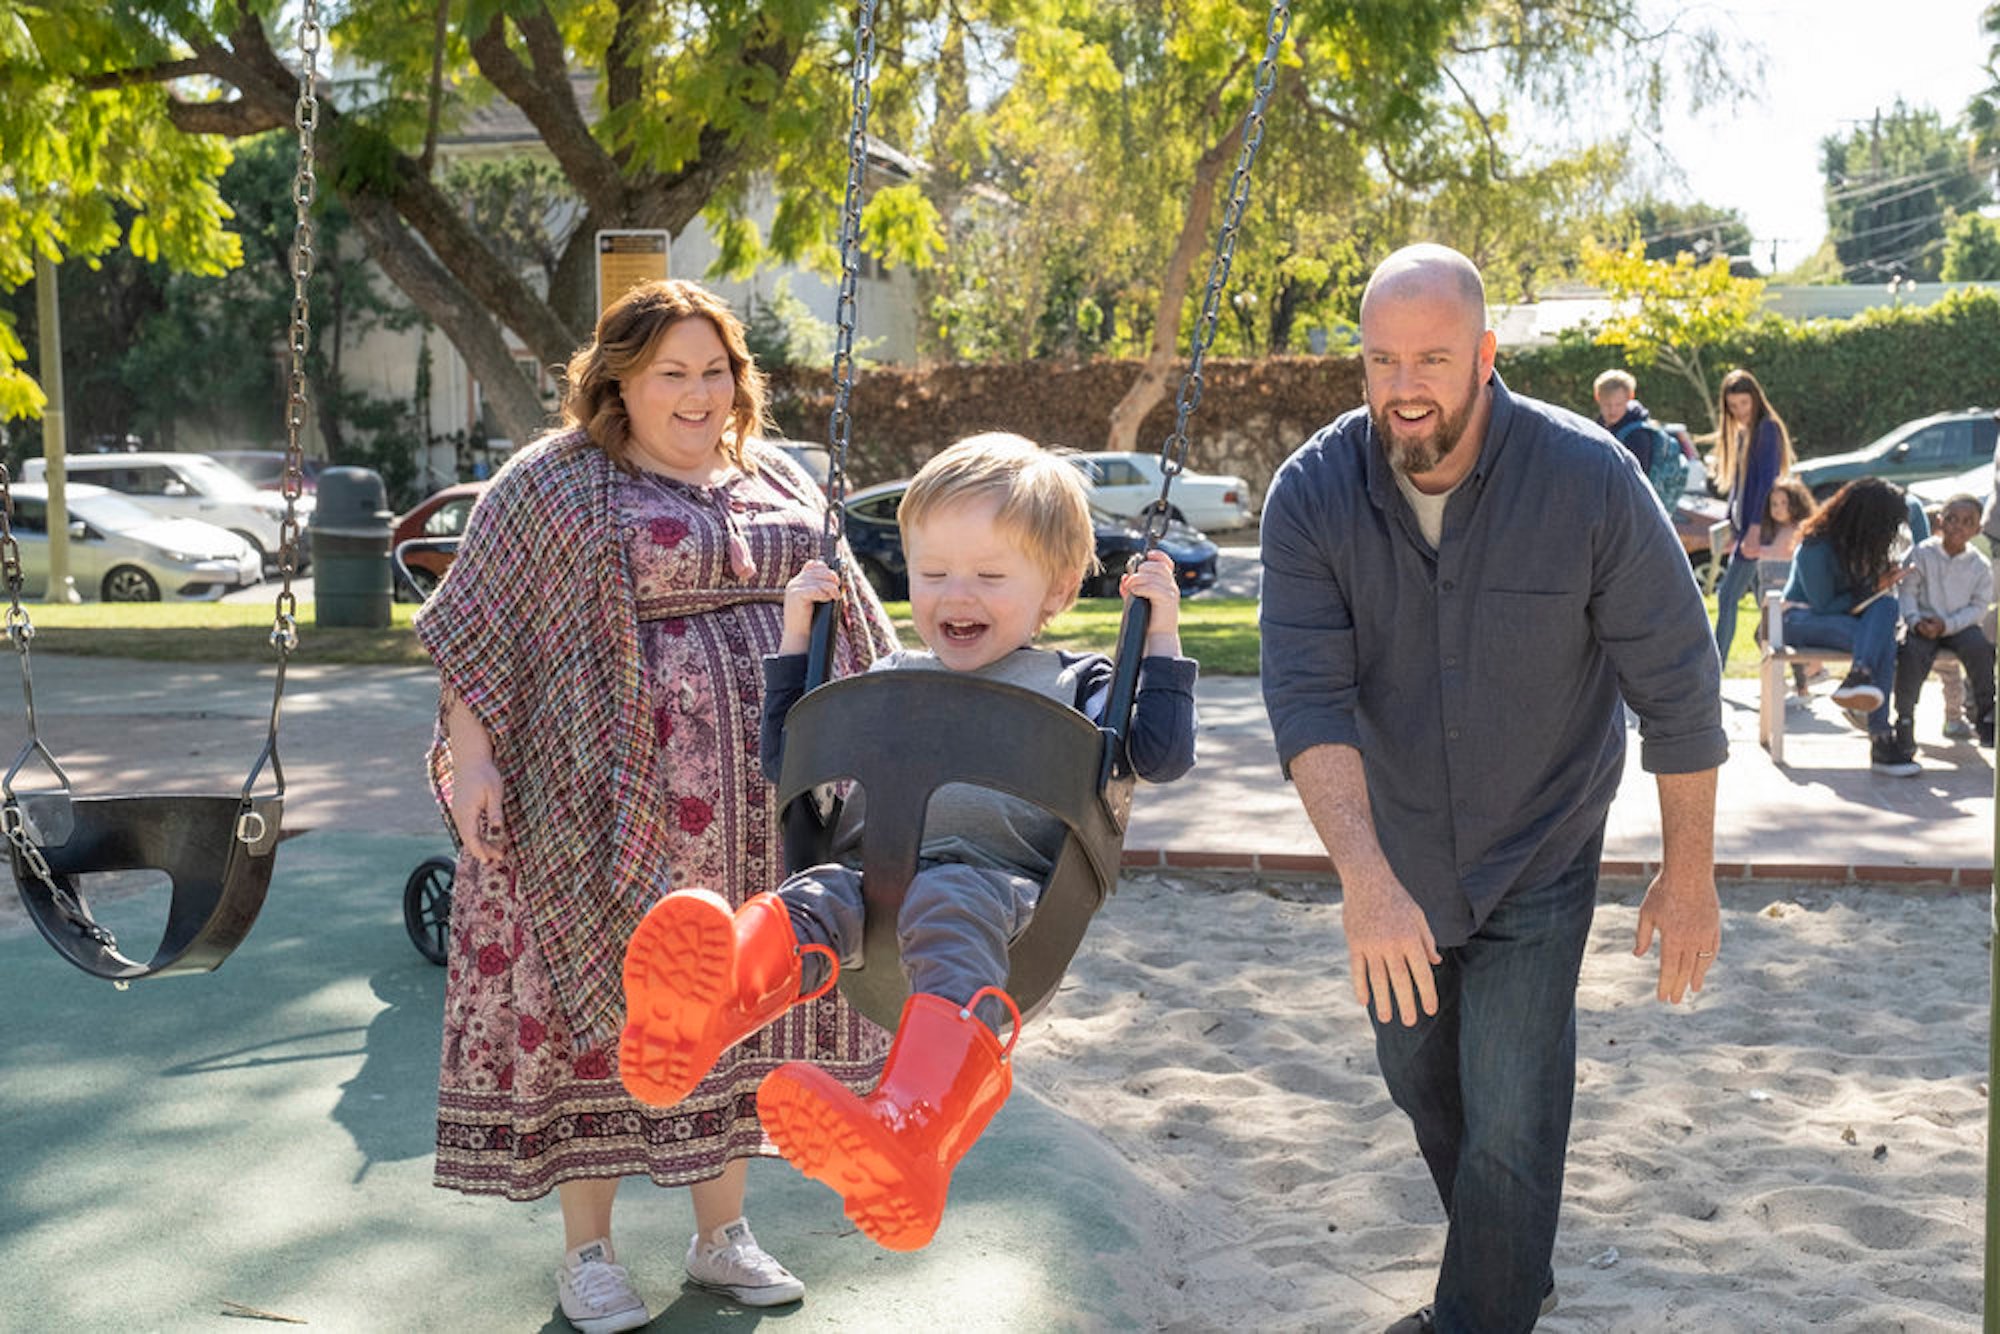 Kate and Toby pushing baby Jack on a swing in Chrissy Metz as Kate, Chris Sullivan as Toby in 'This Is Us' Season 6